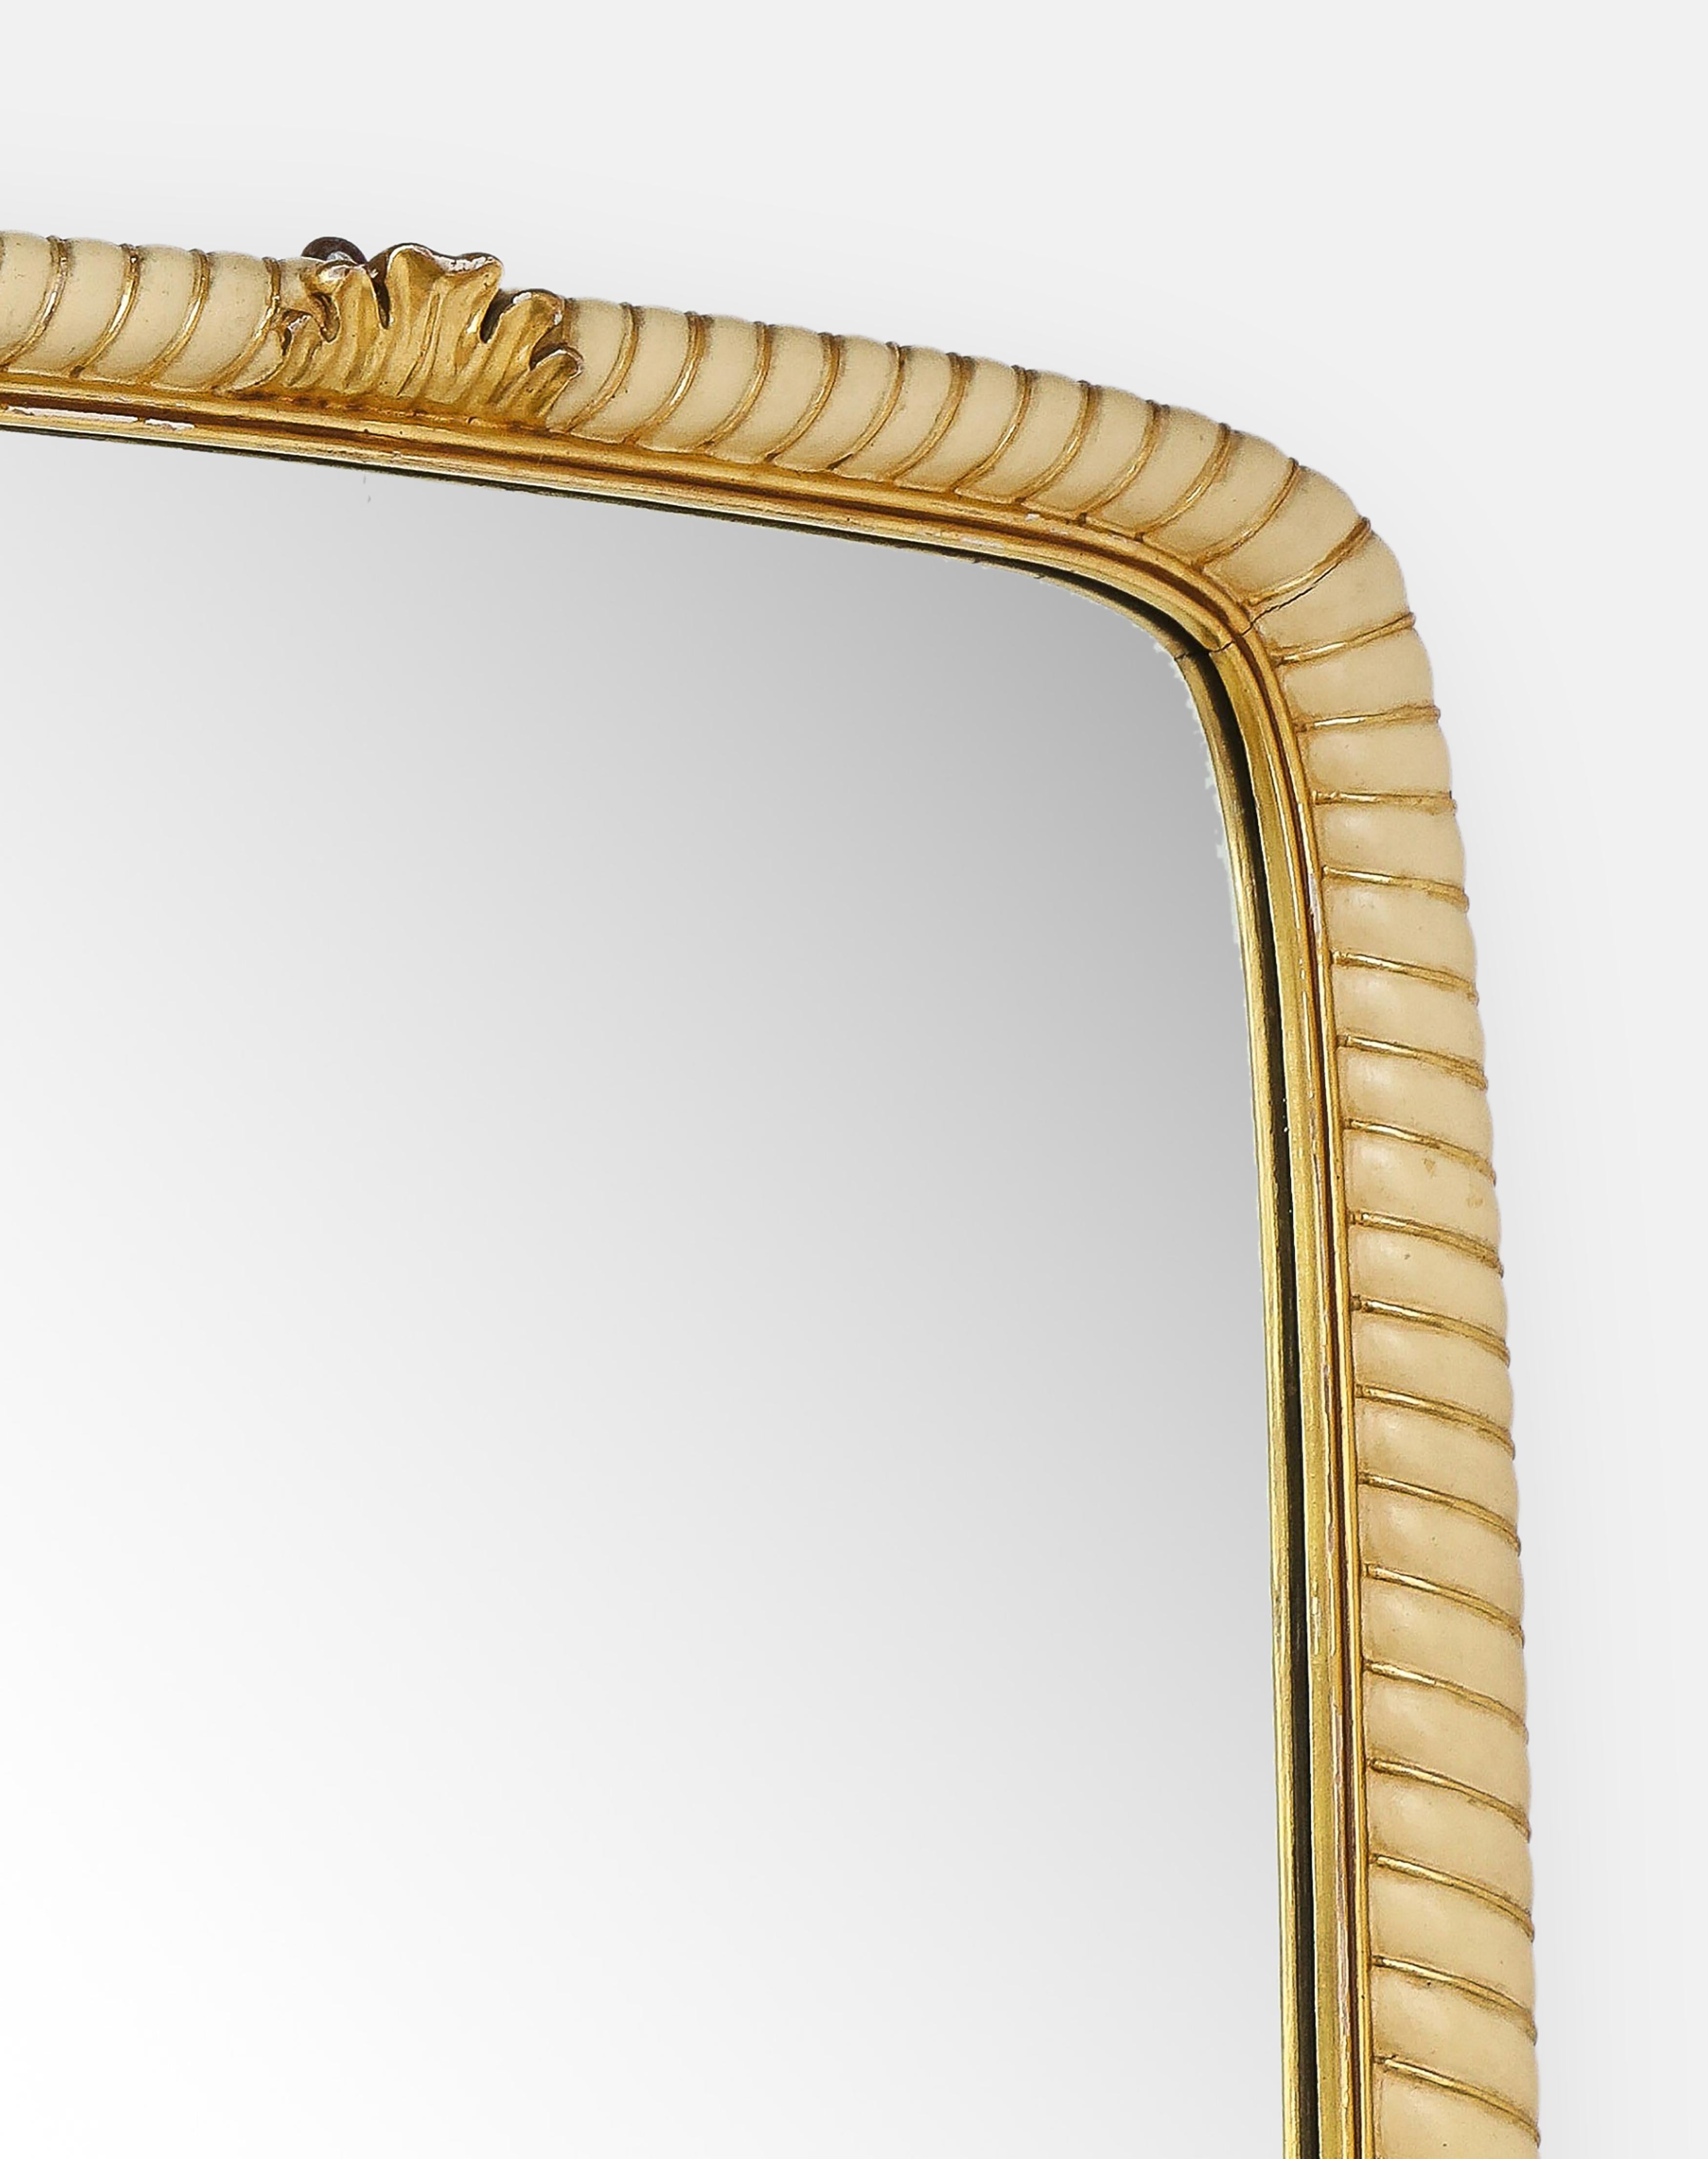 Osvaldo Borsani Rare Large Ivory Painted and Gilded Wood Mirror, Italy, 1940s For Sale 2